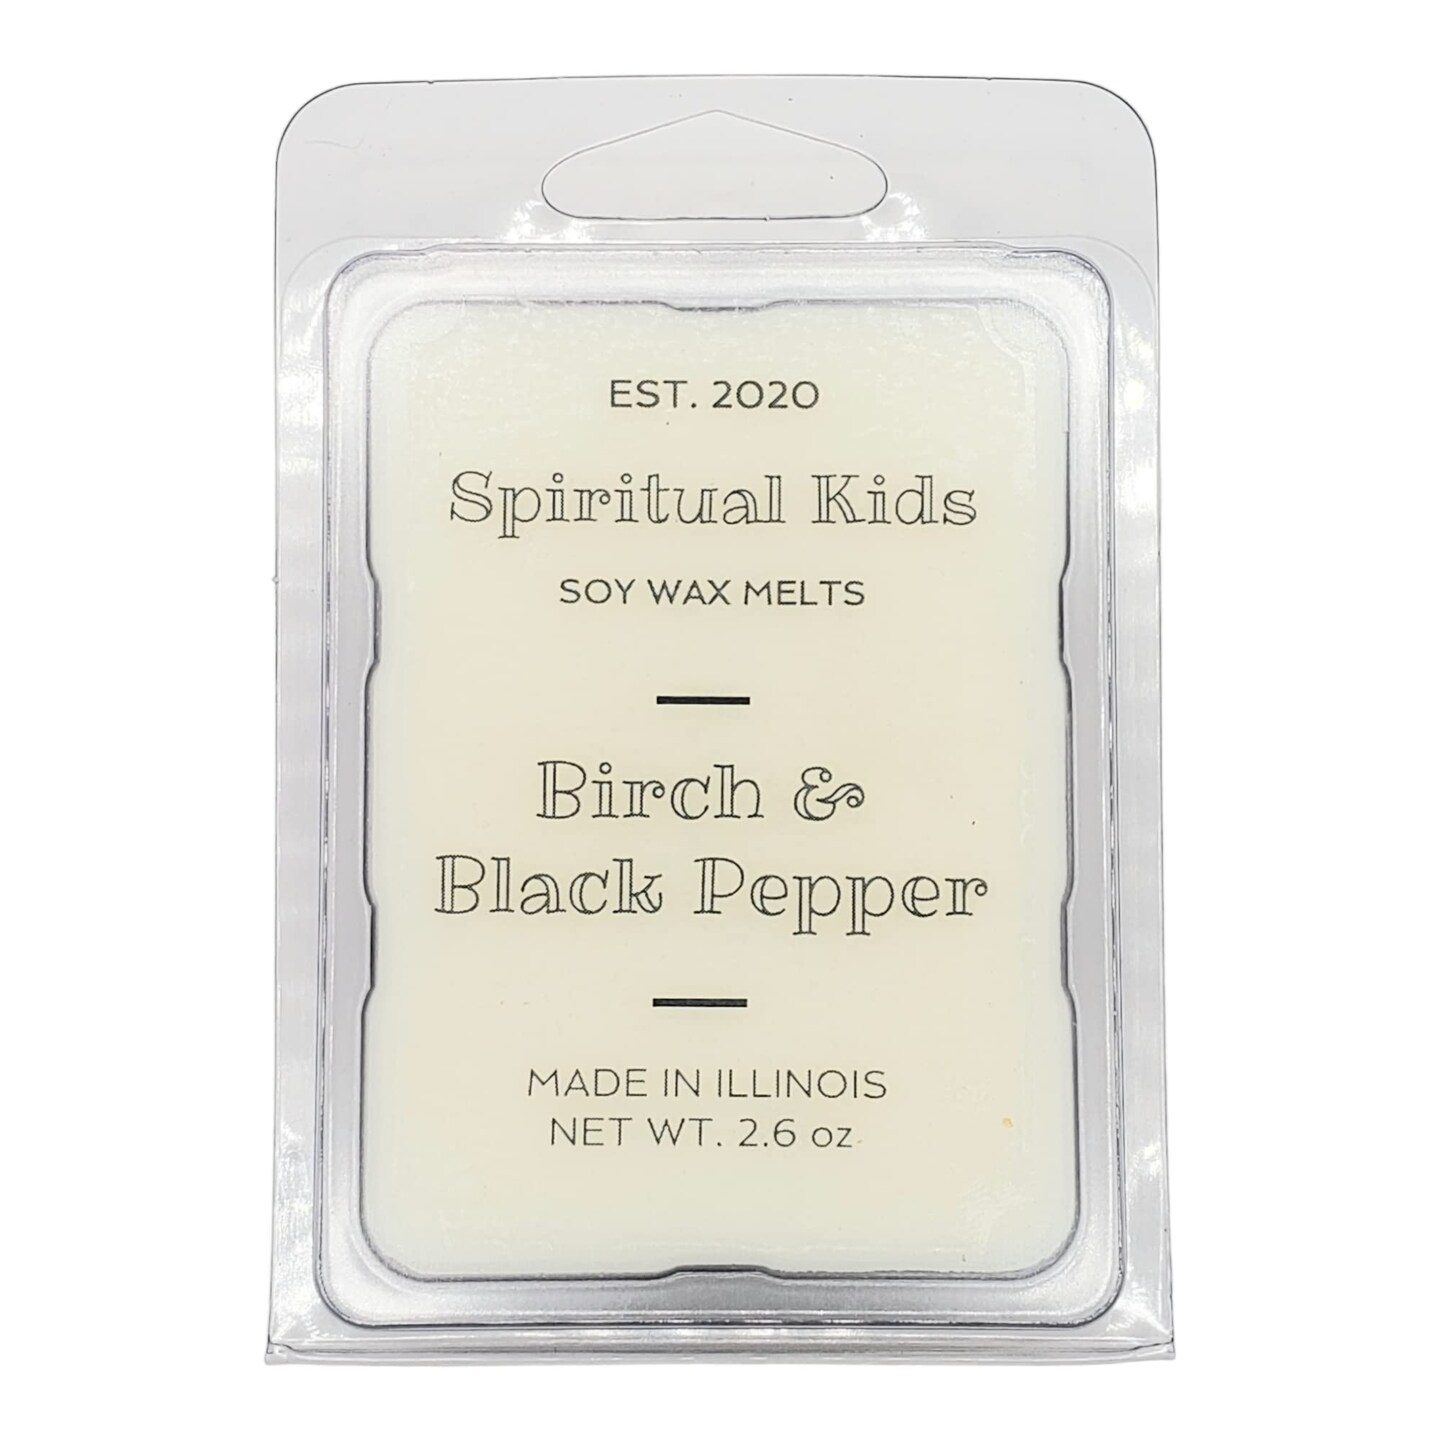 Birch &#x26; Black Pepper Soy Wax Melts 2.6oz 6 Cubes Hand Poured with Fragrant/Essential Oils HIGHLY SCENTED | Herbal &#x26; Spicy Wax Melts